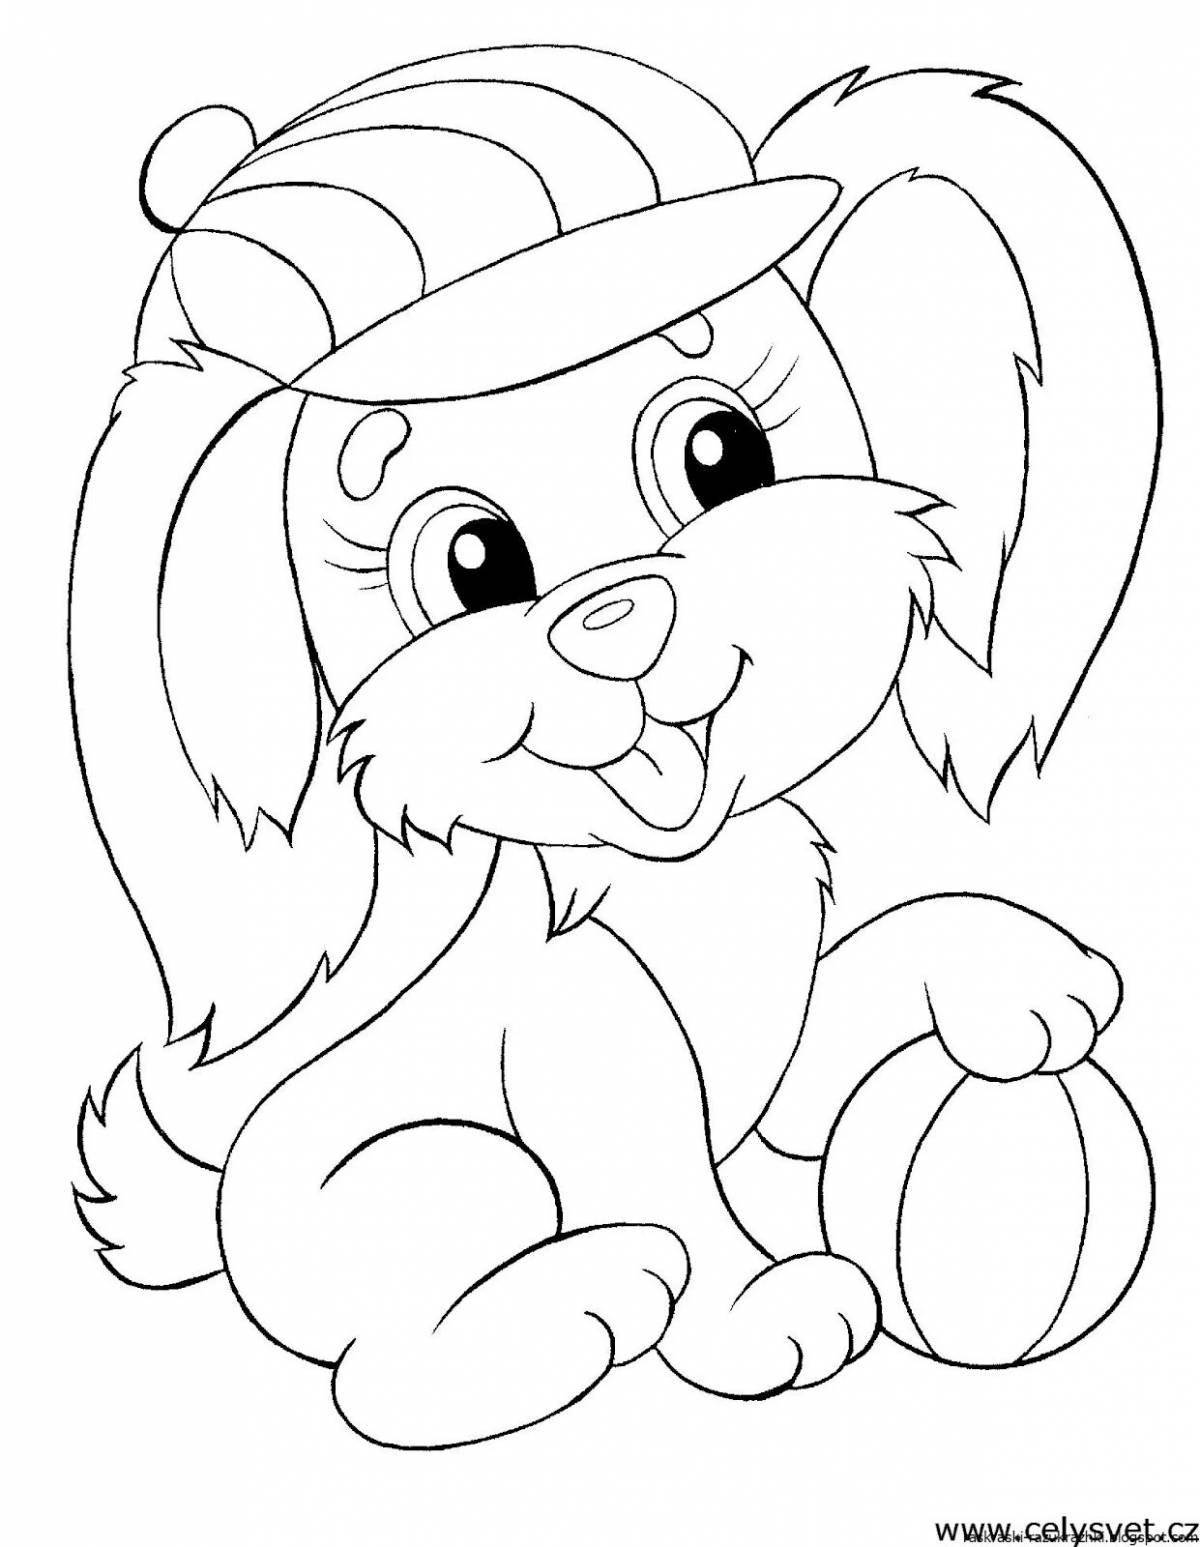 Colorful coloring page